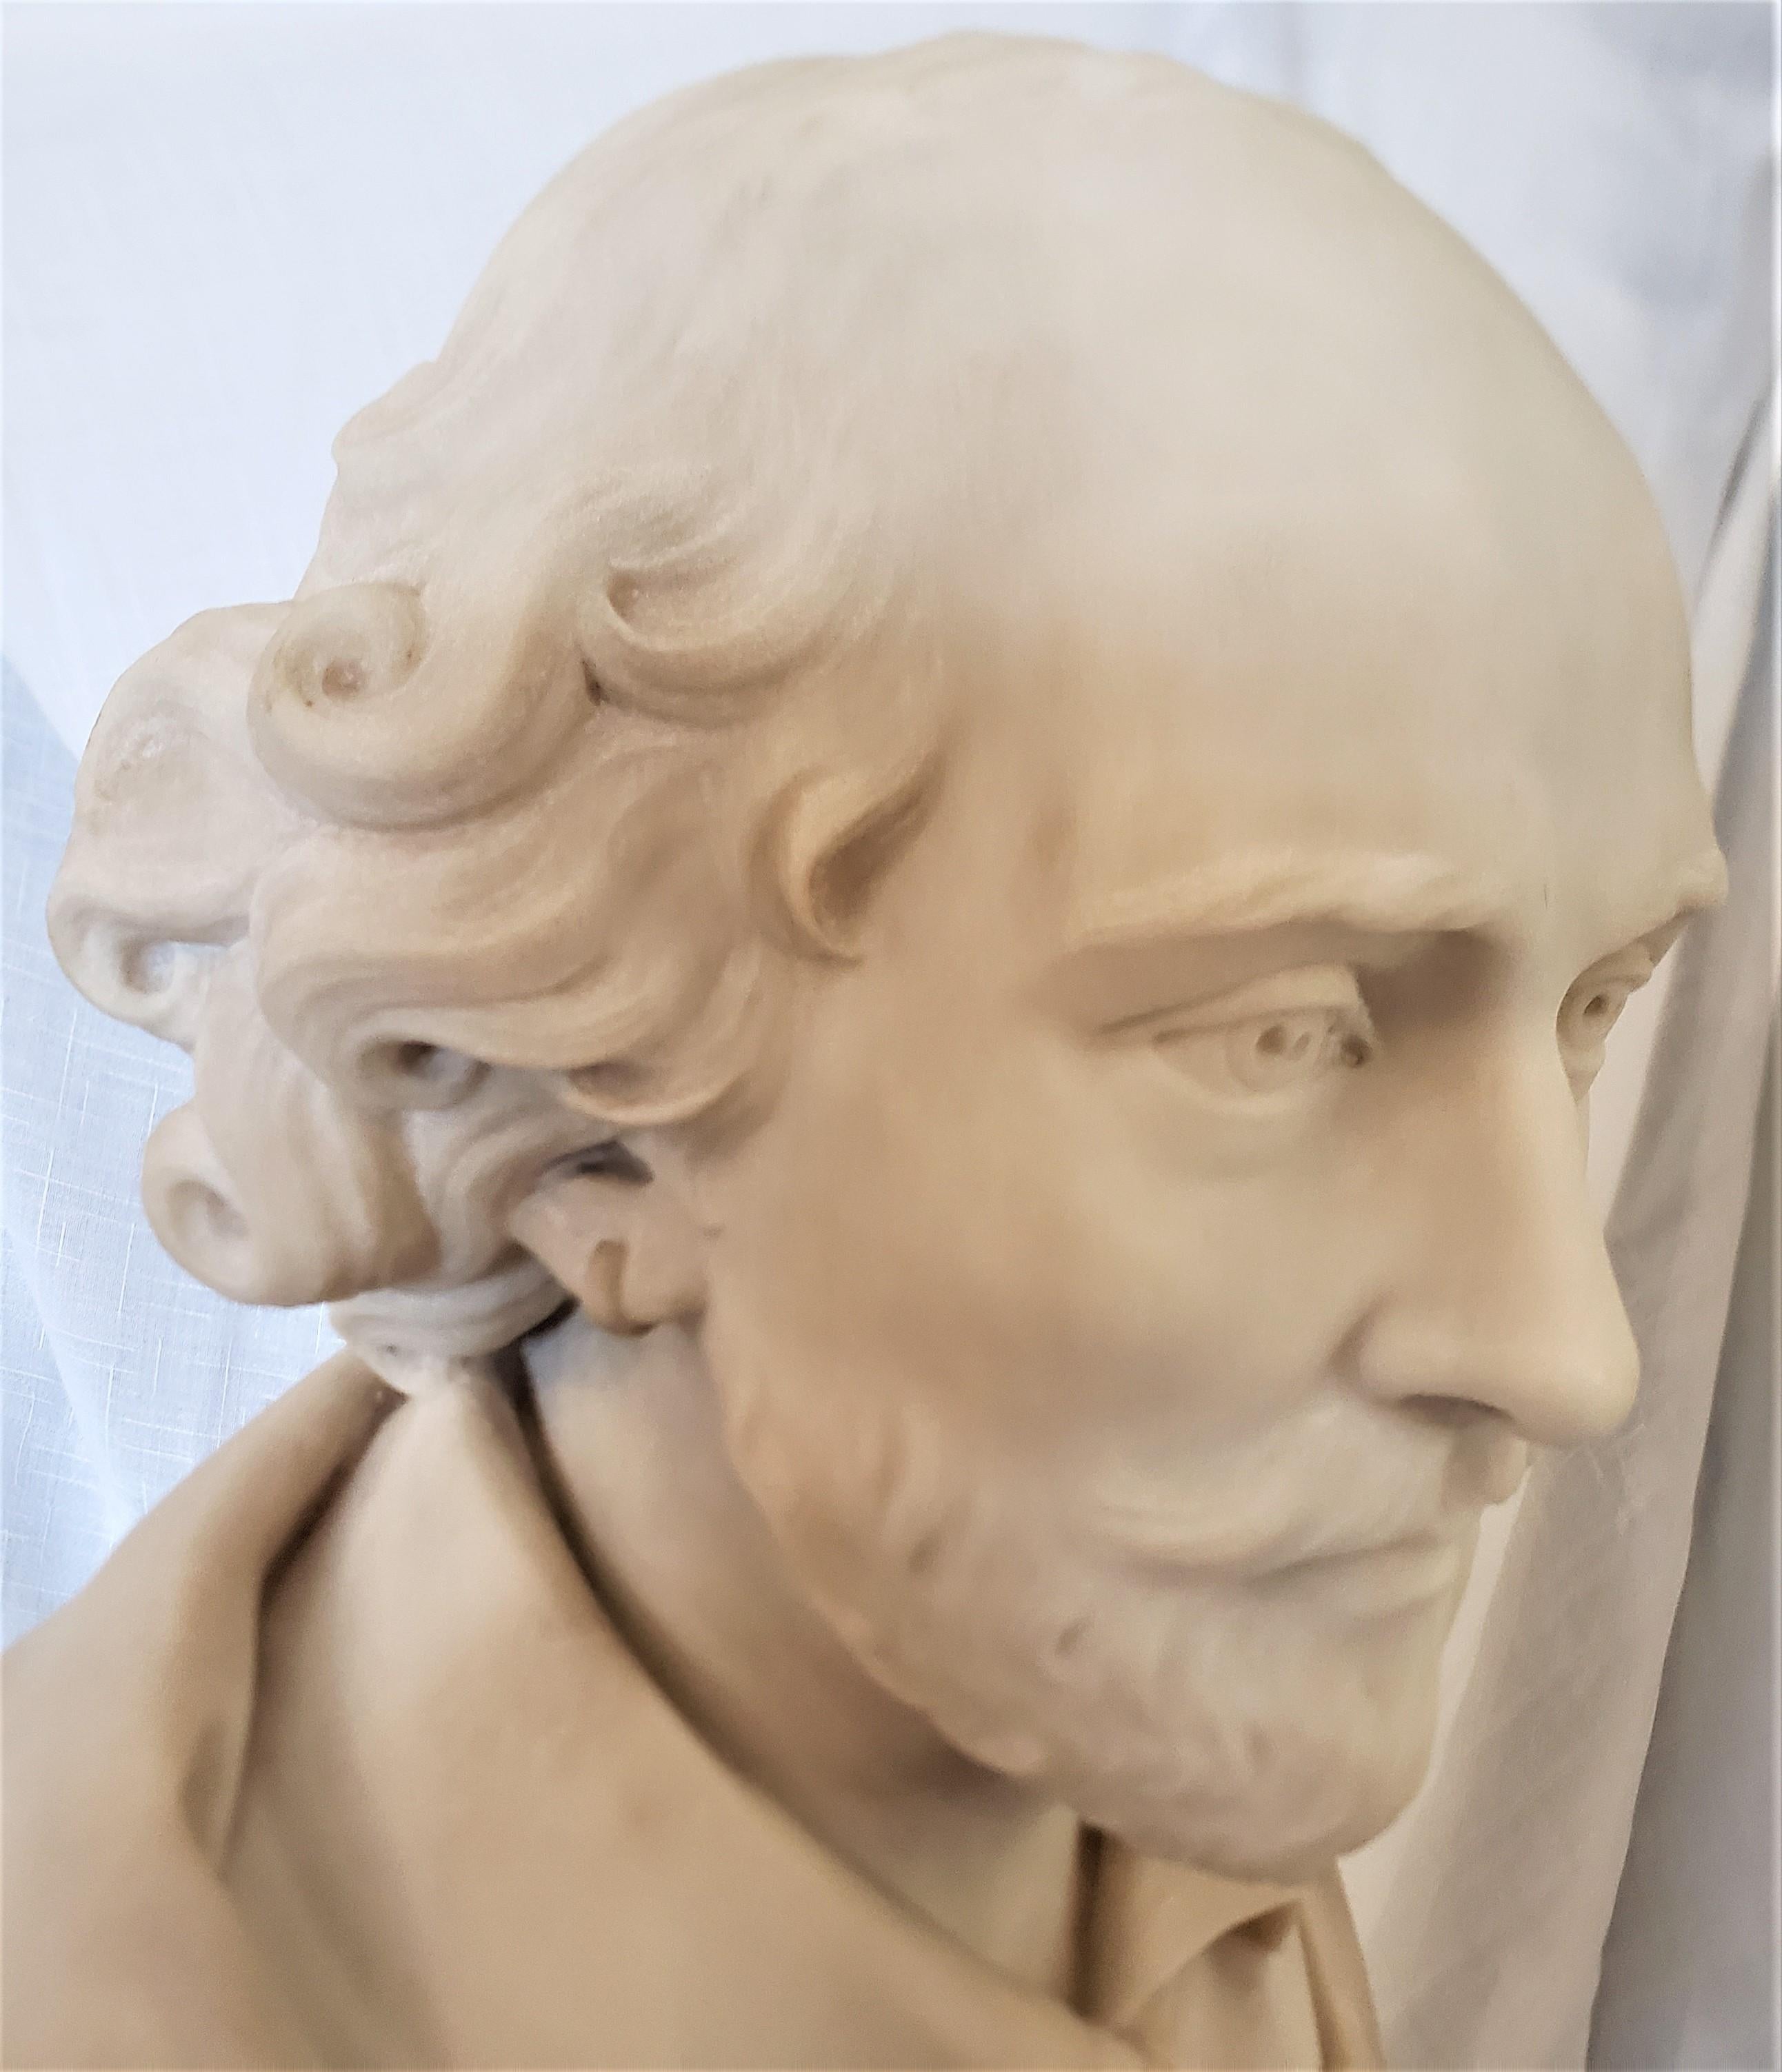 Large Antique English Signed C. Papworth Hand-Carved Marble Bust or Sculpture For Sale 8